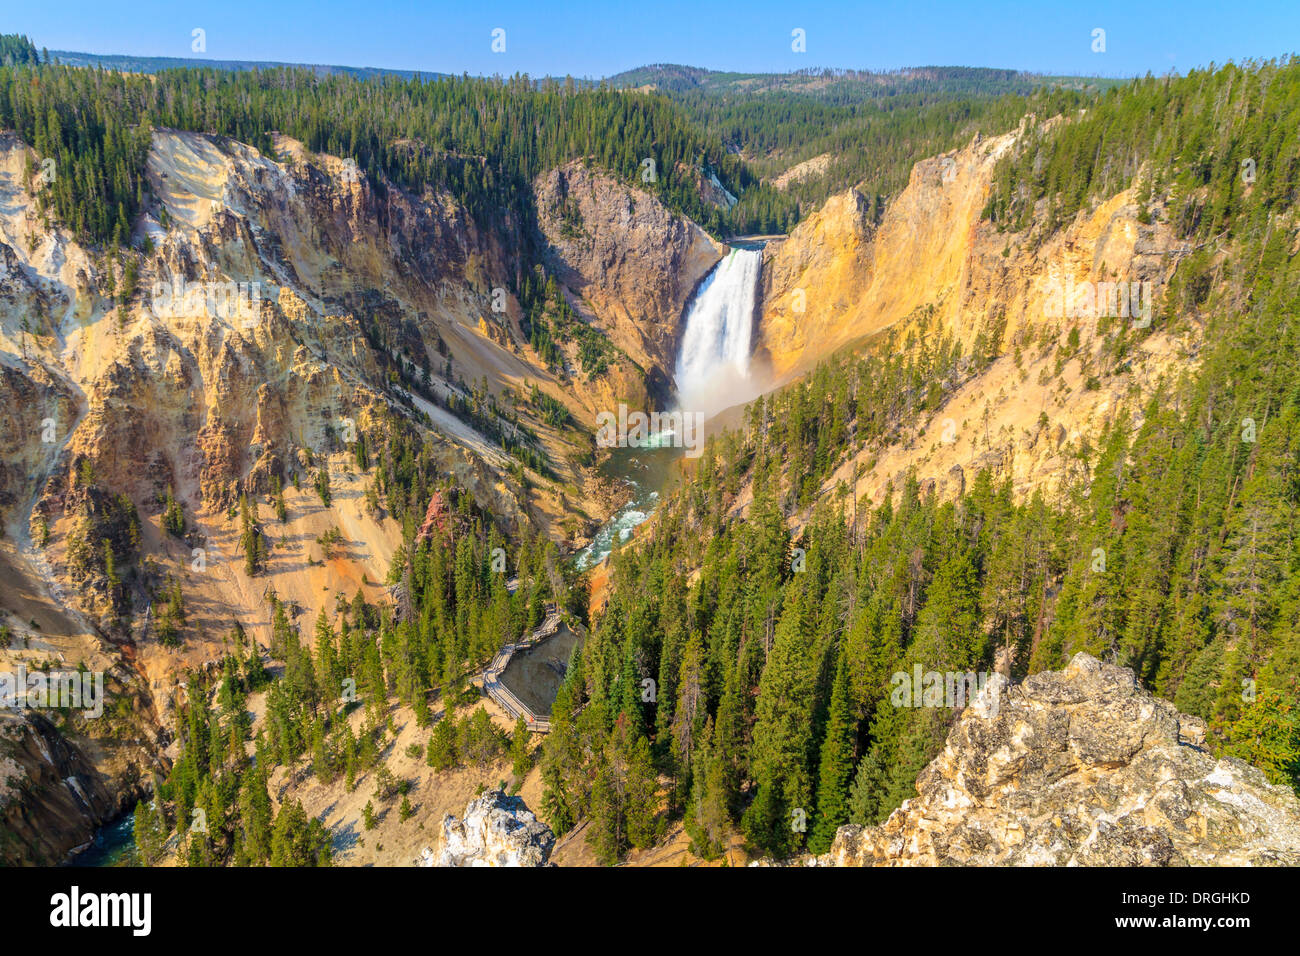 Lower Falls of the Grand Canyon of the Yellowstone National Park, Wyoming Stock Photo